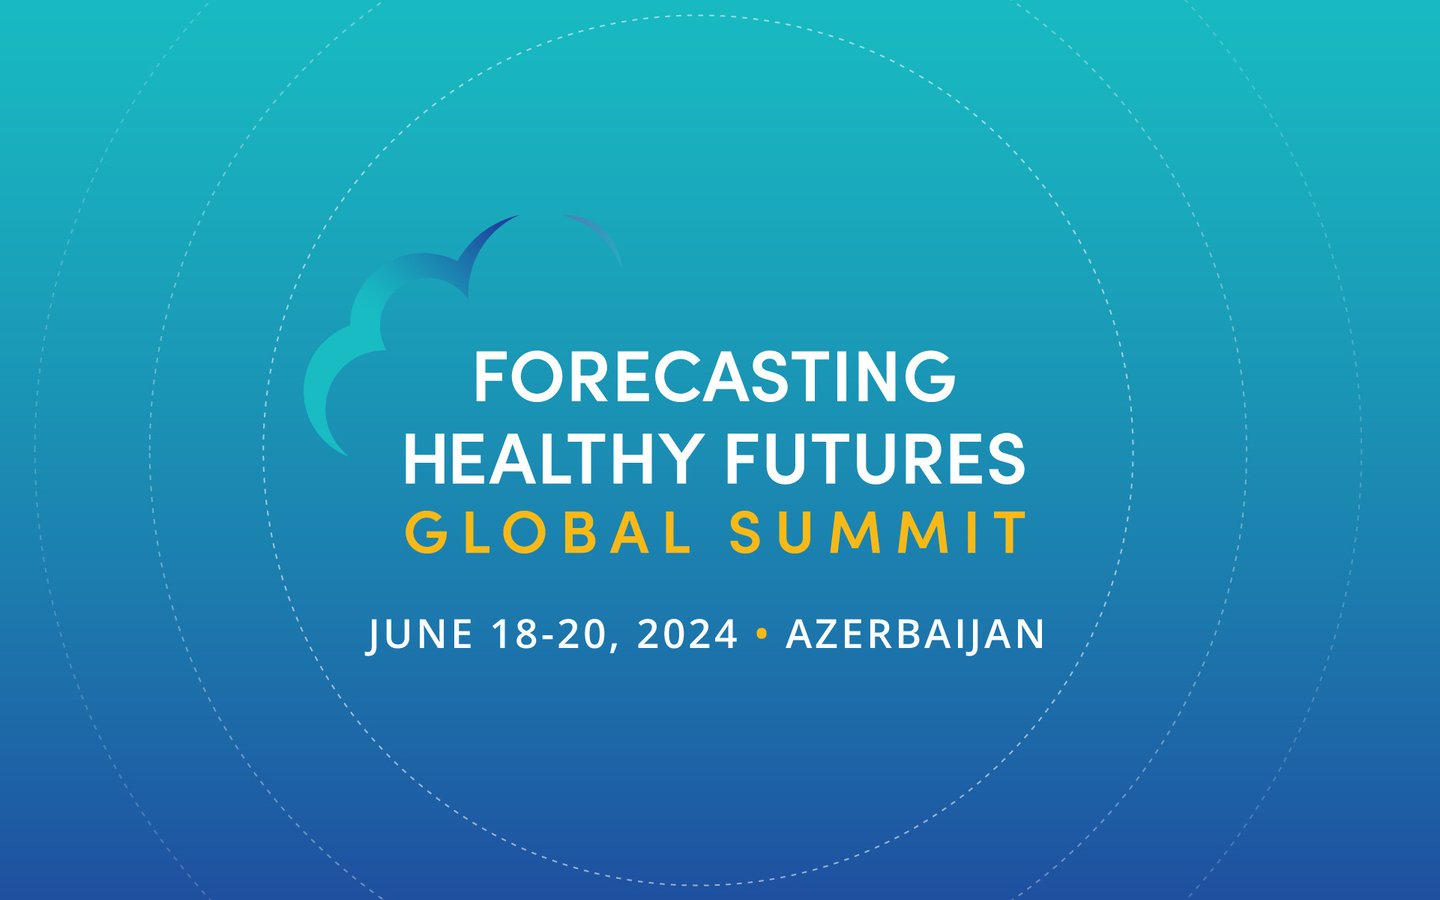 Forecasting Healthy Futures Global Summit 2024